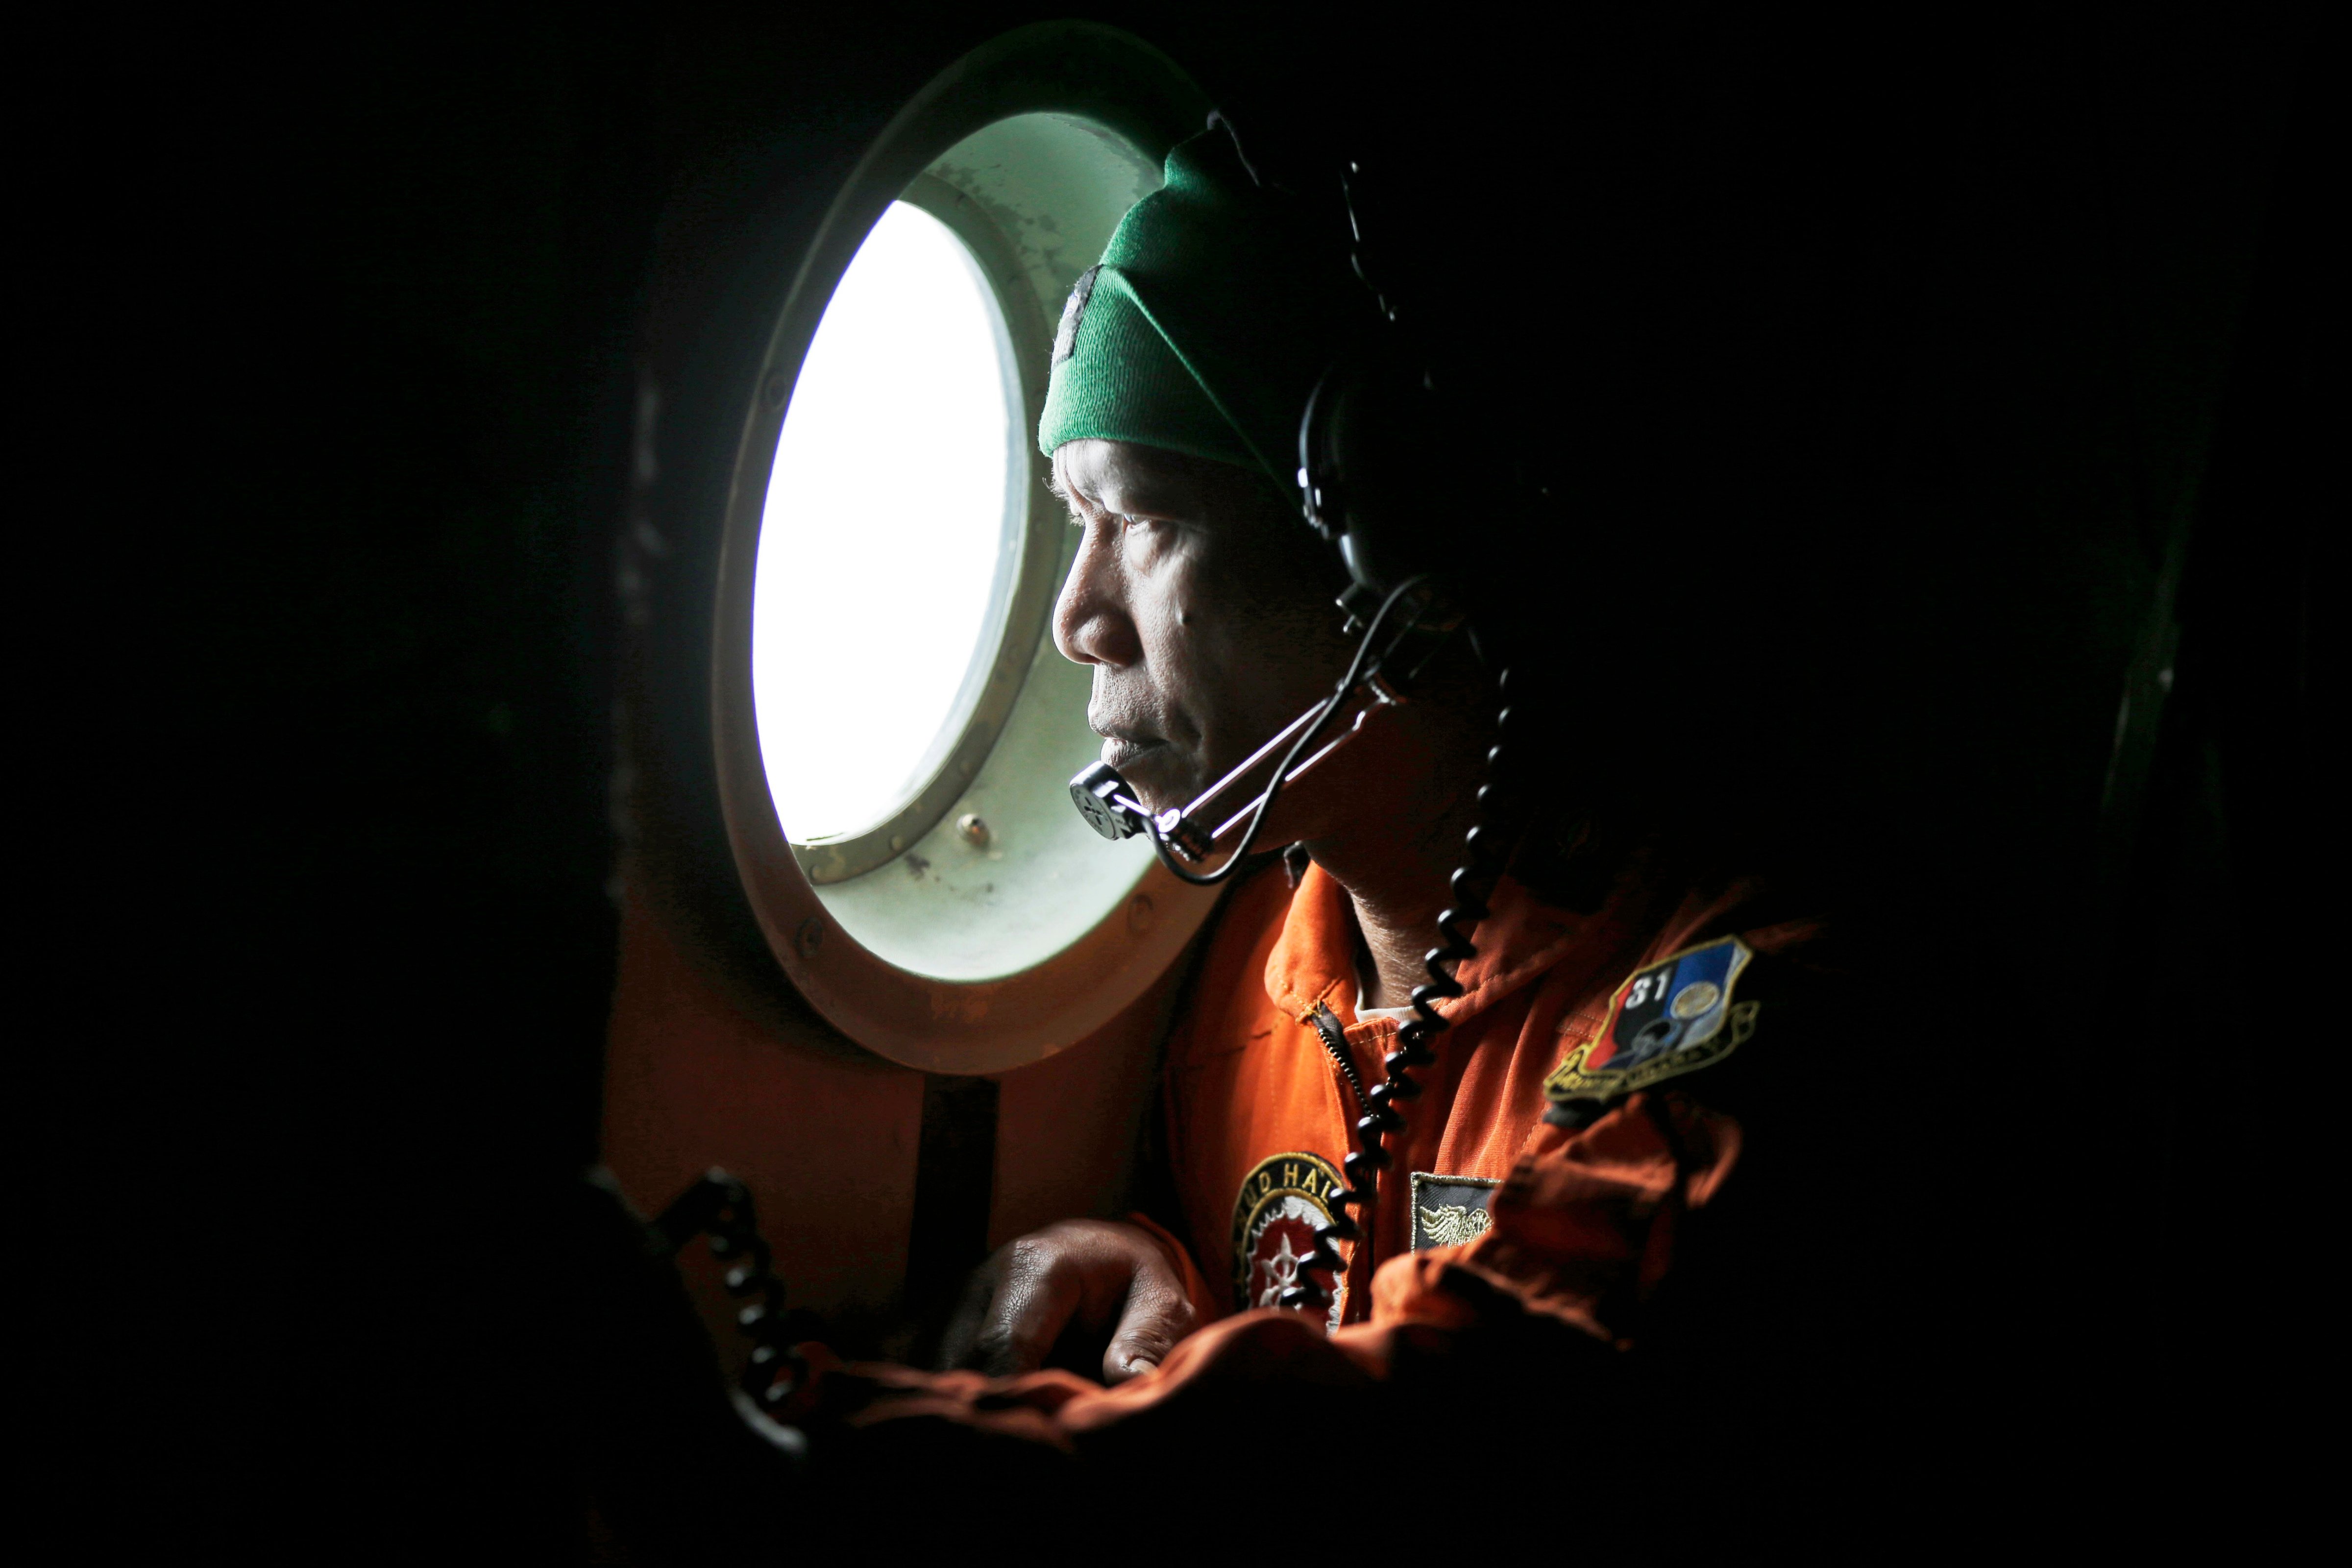 A crew member of the Indonesian air force's C-130 airplane looks out of the window during a search operation for the missing AirAsia Flight QZ 8501 jetliner over the waters of Karimata Strait in Indonesia on Dec. 29, 2014 (Dita Alangkara—AP)